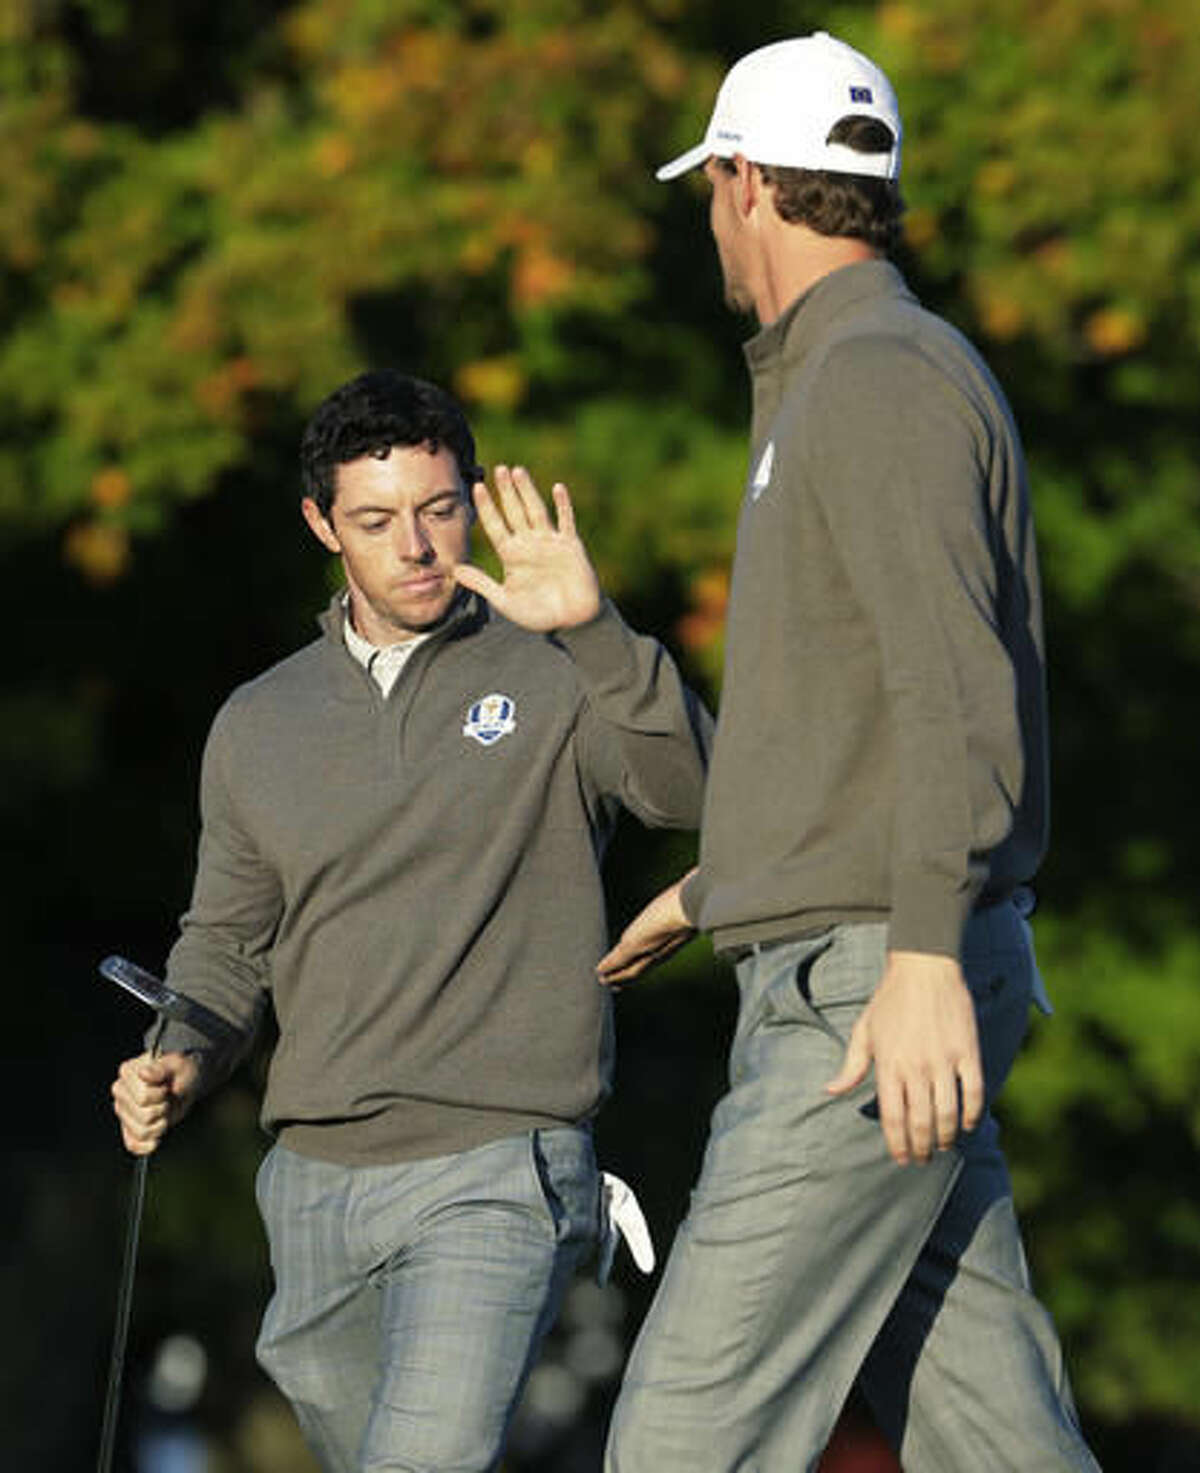 Europe’s Rory McIlroy high fives Europe’s Thomas Pieters on the second hole during a foresomes match at the Ryder Cup golf tournament Saturday, Oct. 1, 2016, at Hazeltine National Golf Club in Chaska, Minn. (AP Photo/Charlie Riedel)